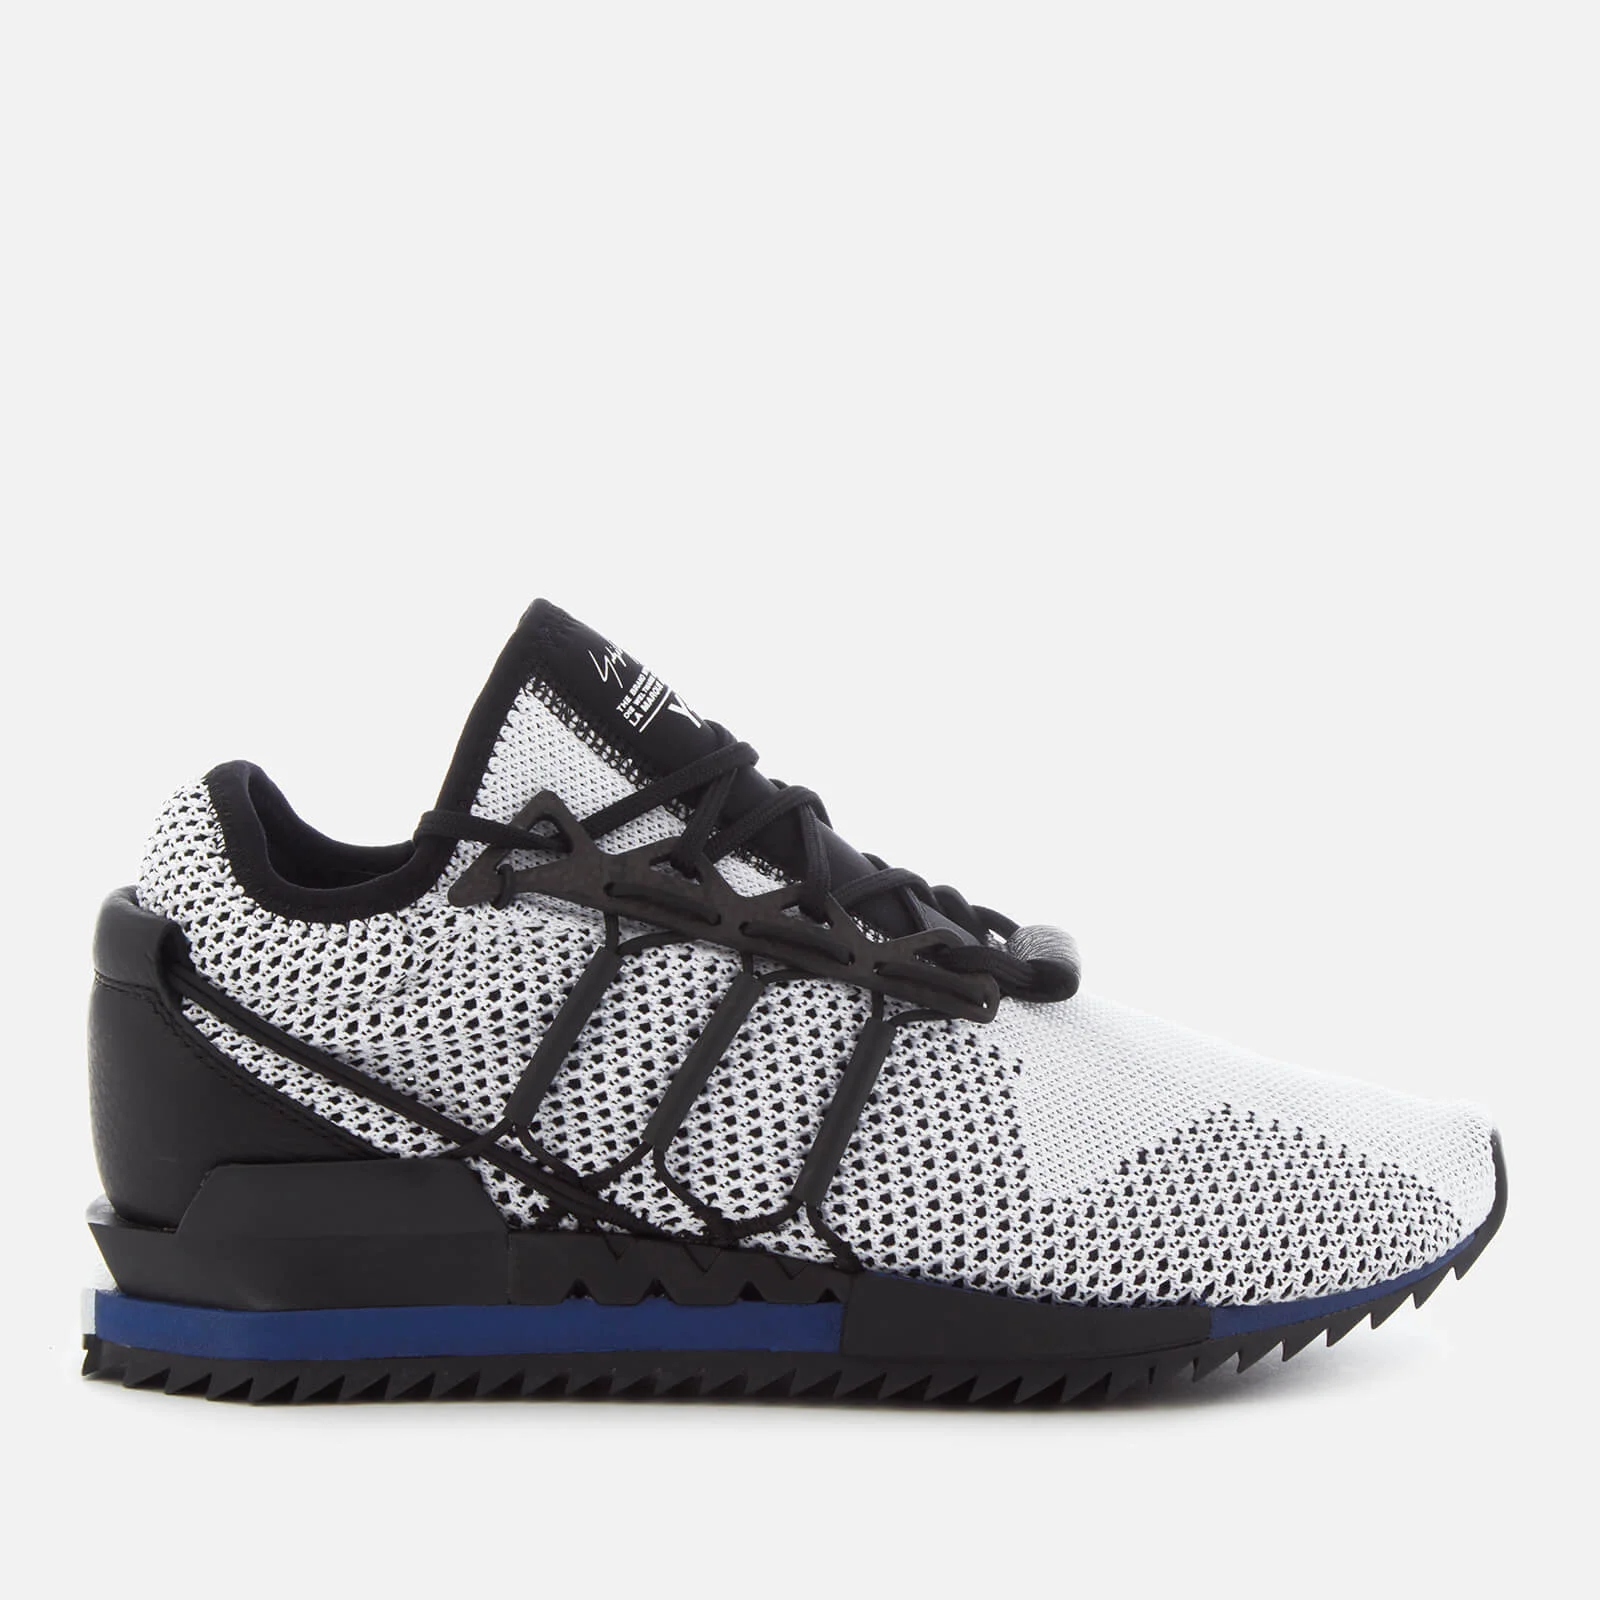 Y-3 Men's Harigane Trainers - White/Black/Mystery Ink Image 1